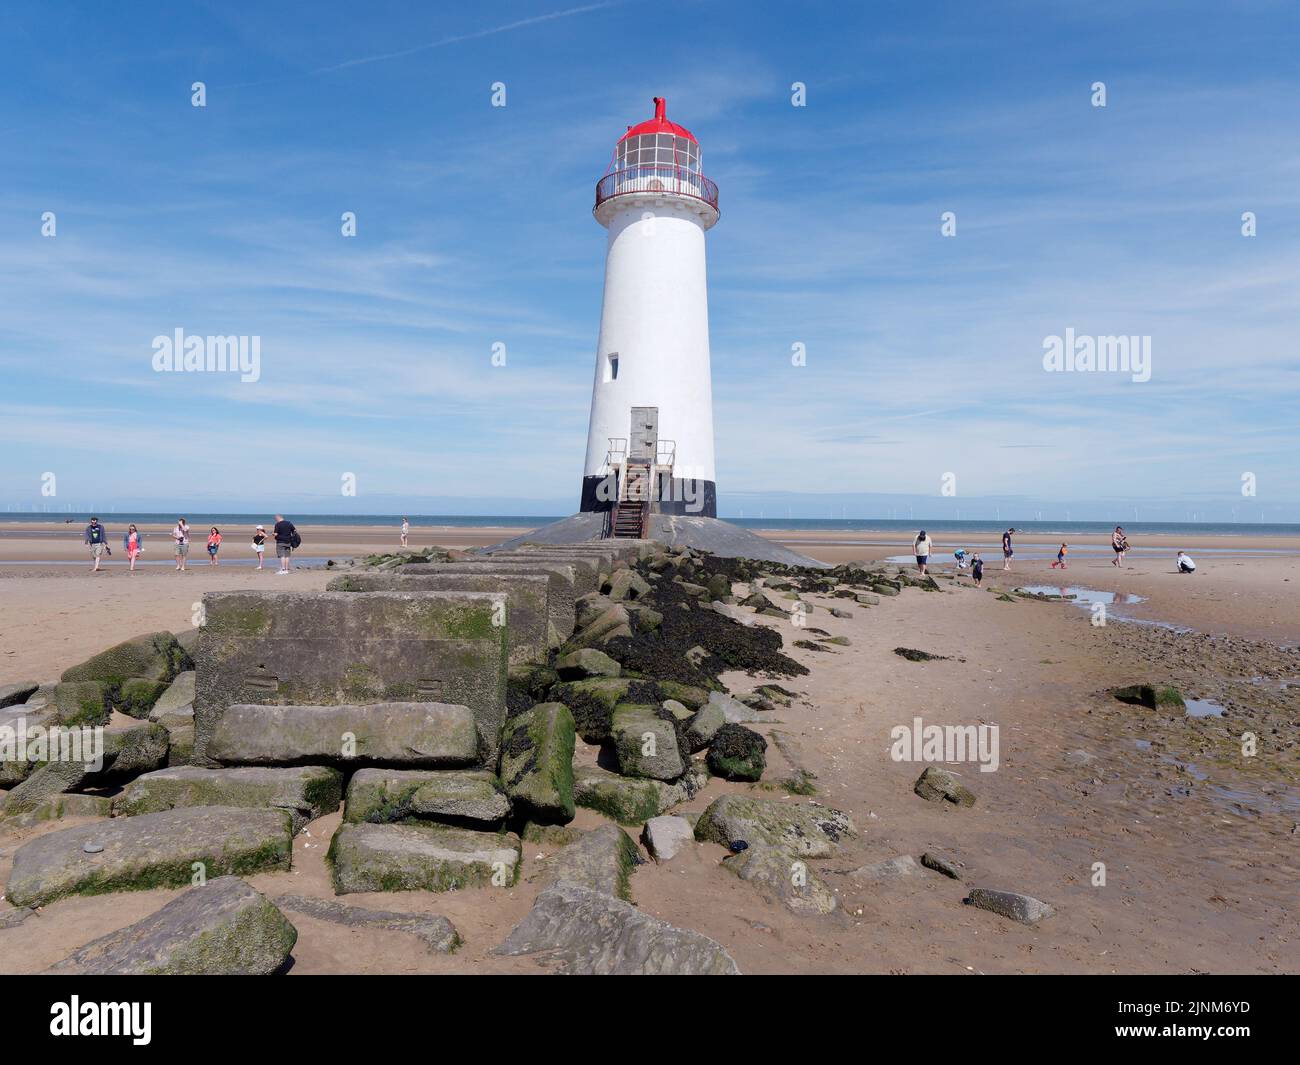 Talacre, Flintshire, Wales, Aug 07 2022: Point of Ayr Lighthouse aka Talacre Lighthouse, a Grade II listed building situated on the beach. Stock Photo